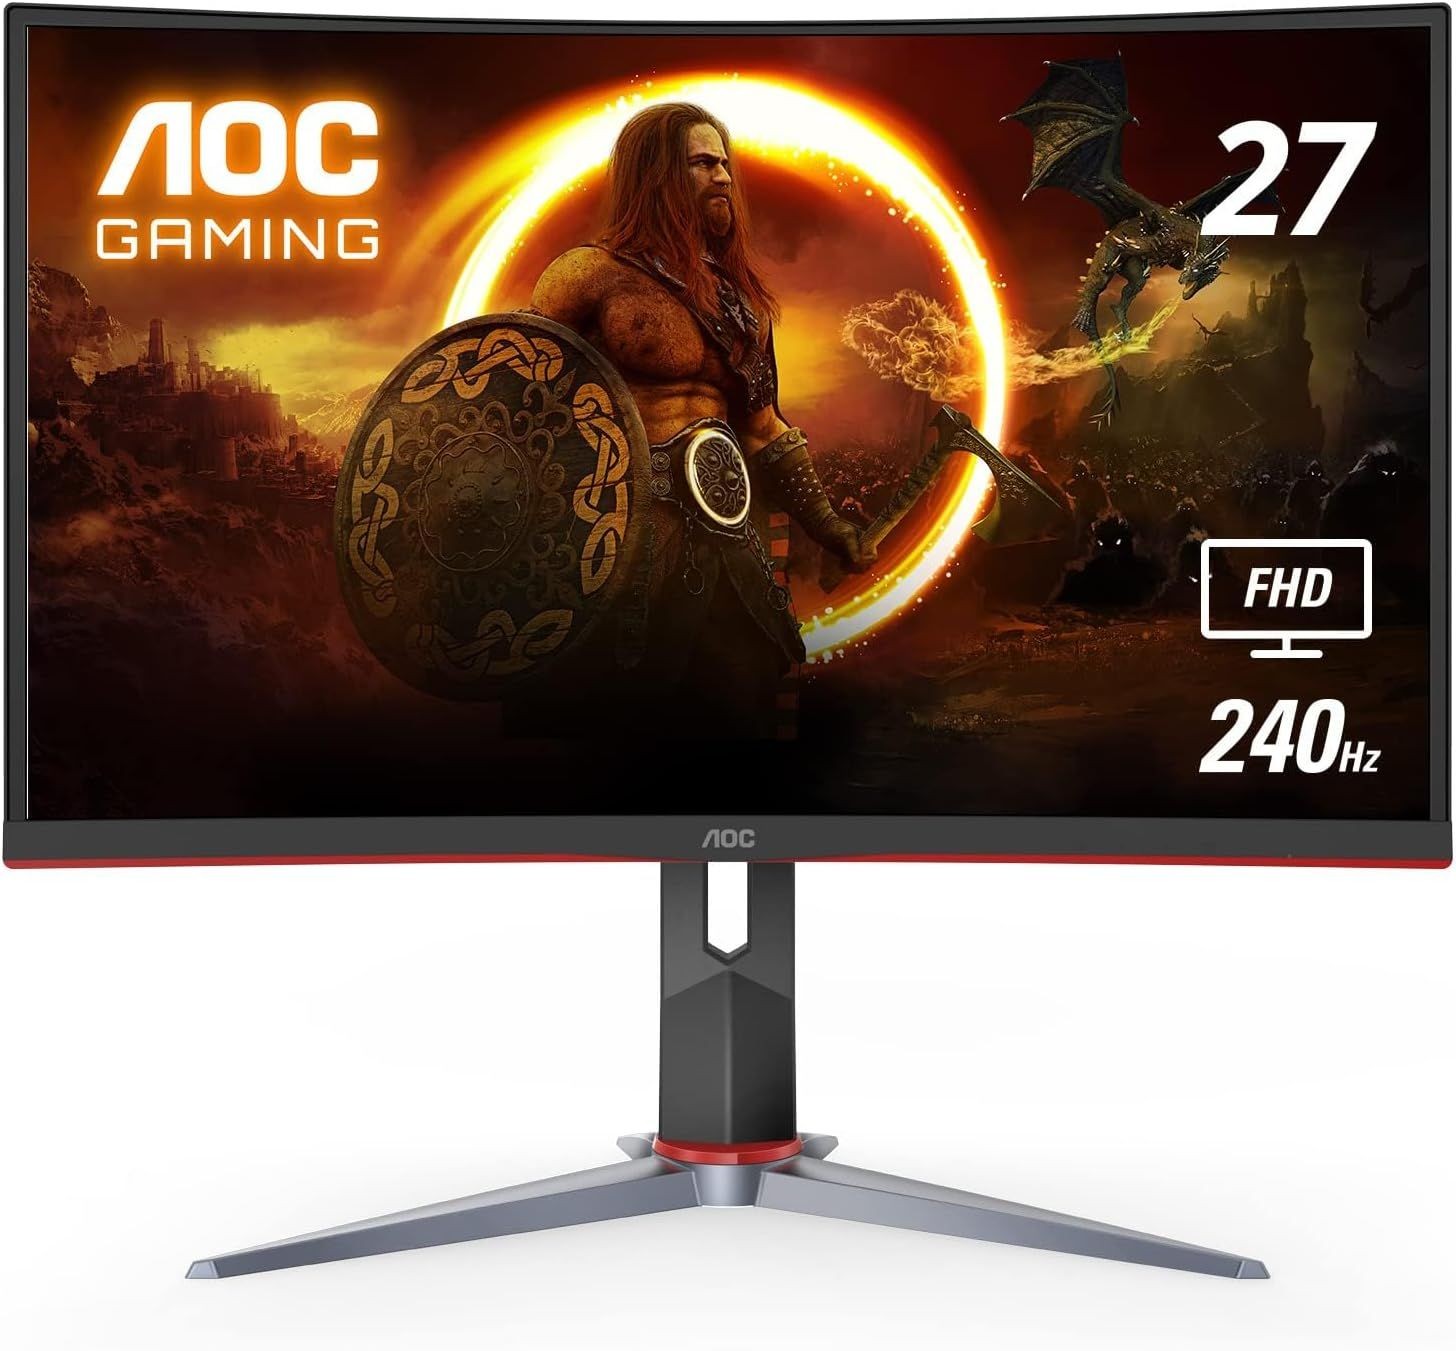 AOC C27G2Z: 27" Curved Ultra-Fast Gaming Monitor, FHD 240Hz, FreeSync, Height Adjustable